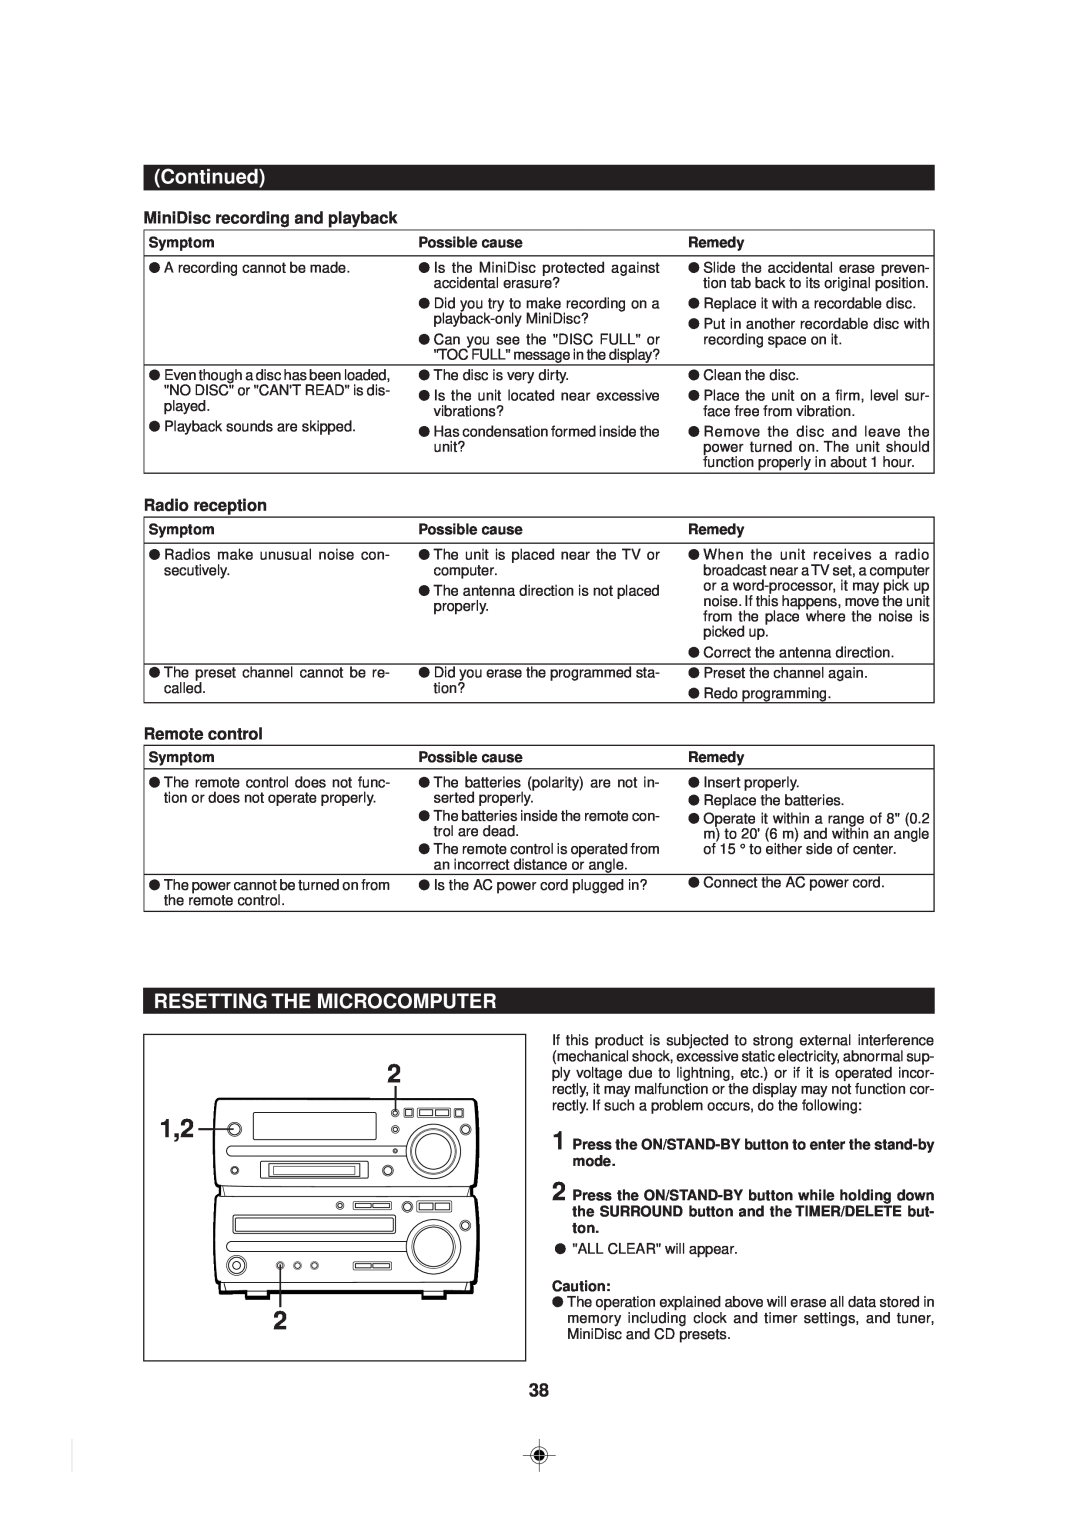 Sharp MD-MX30 operation manual 2 1,2, Resetting The Microcomputer, Continued 